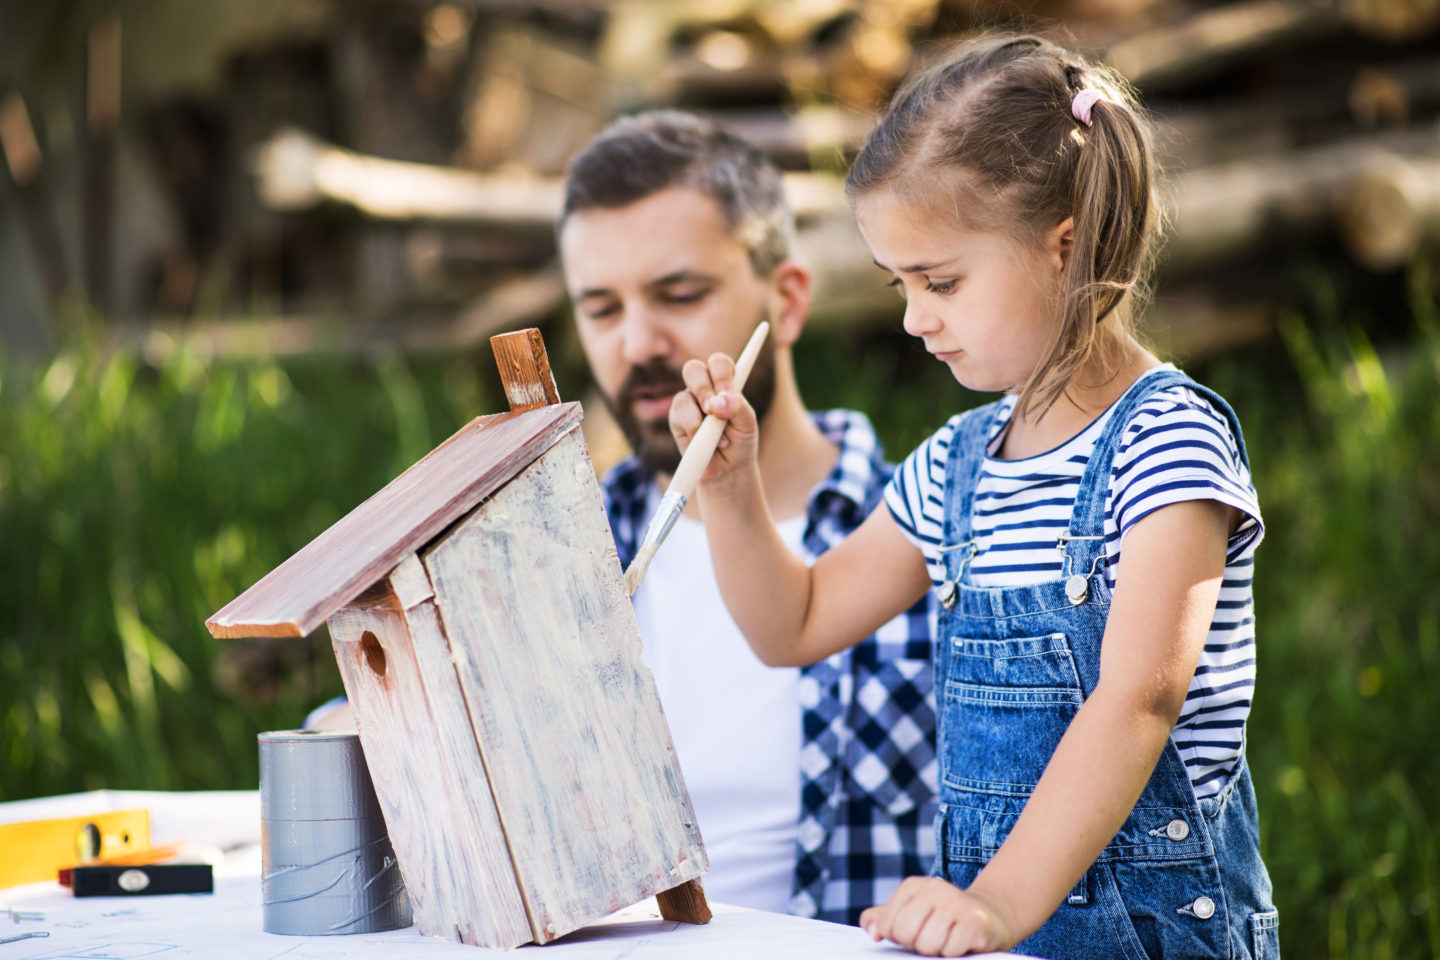 Best Outdoor Family Bonding Activities To Try This Summer: Build a Bird Feeder Or A Fairy House